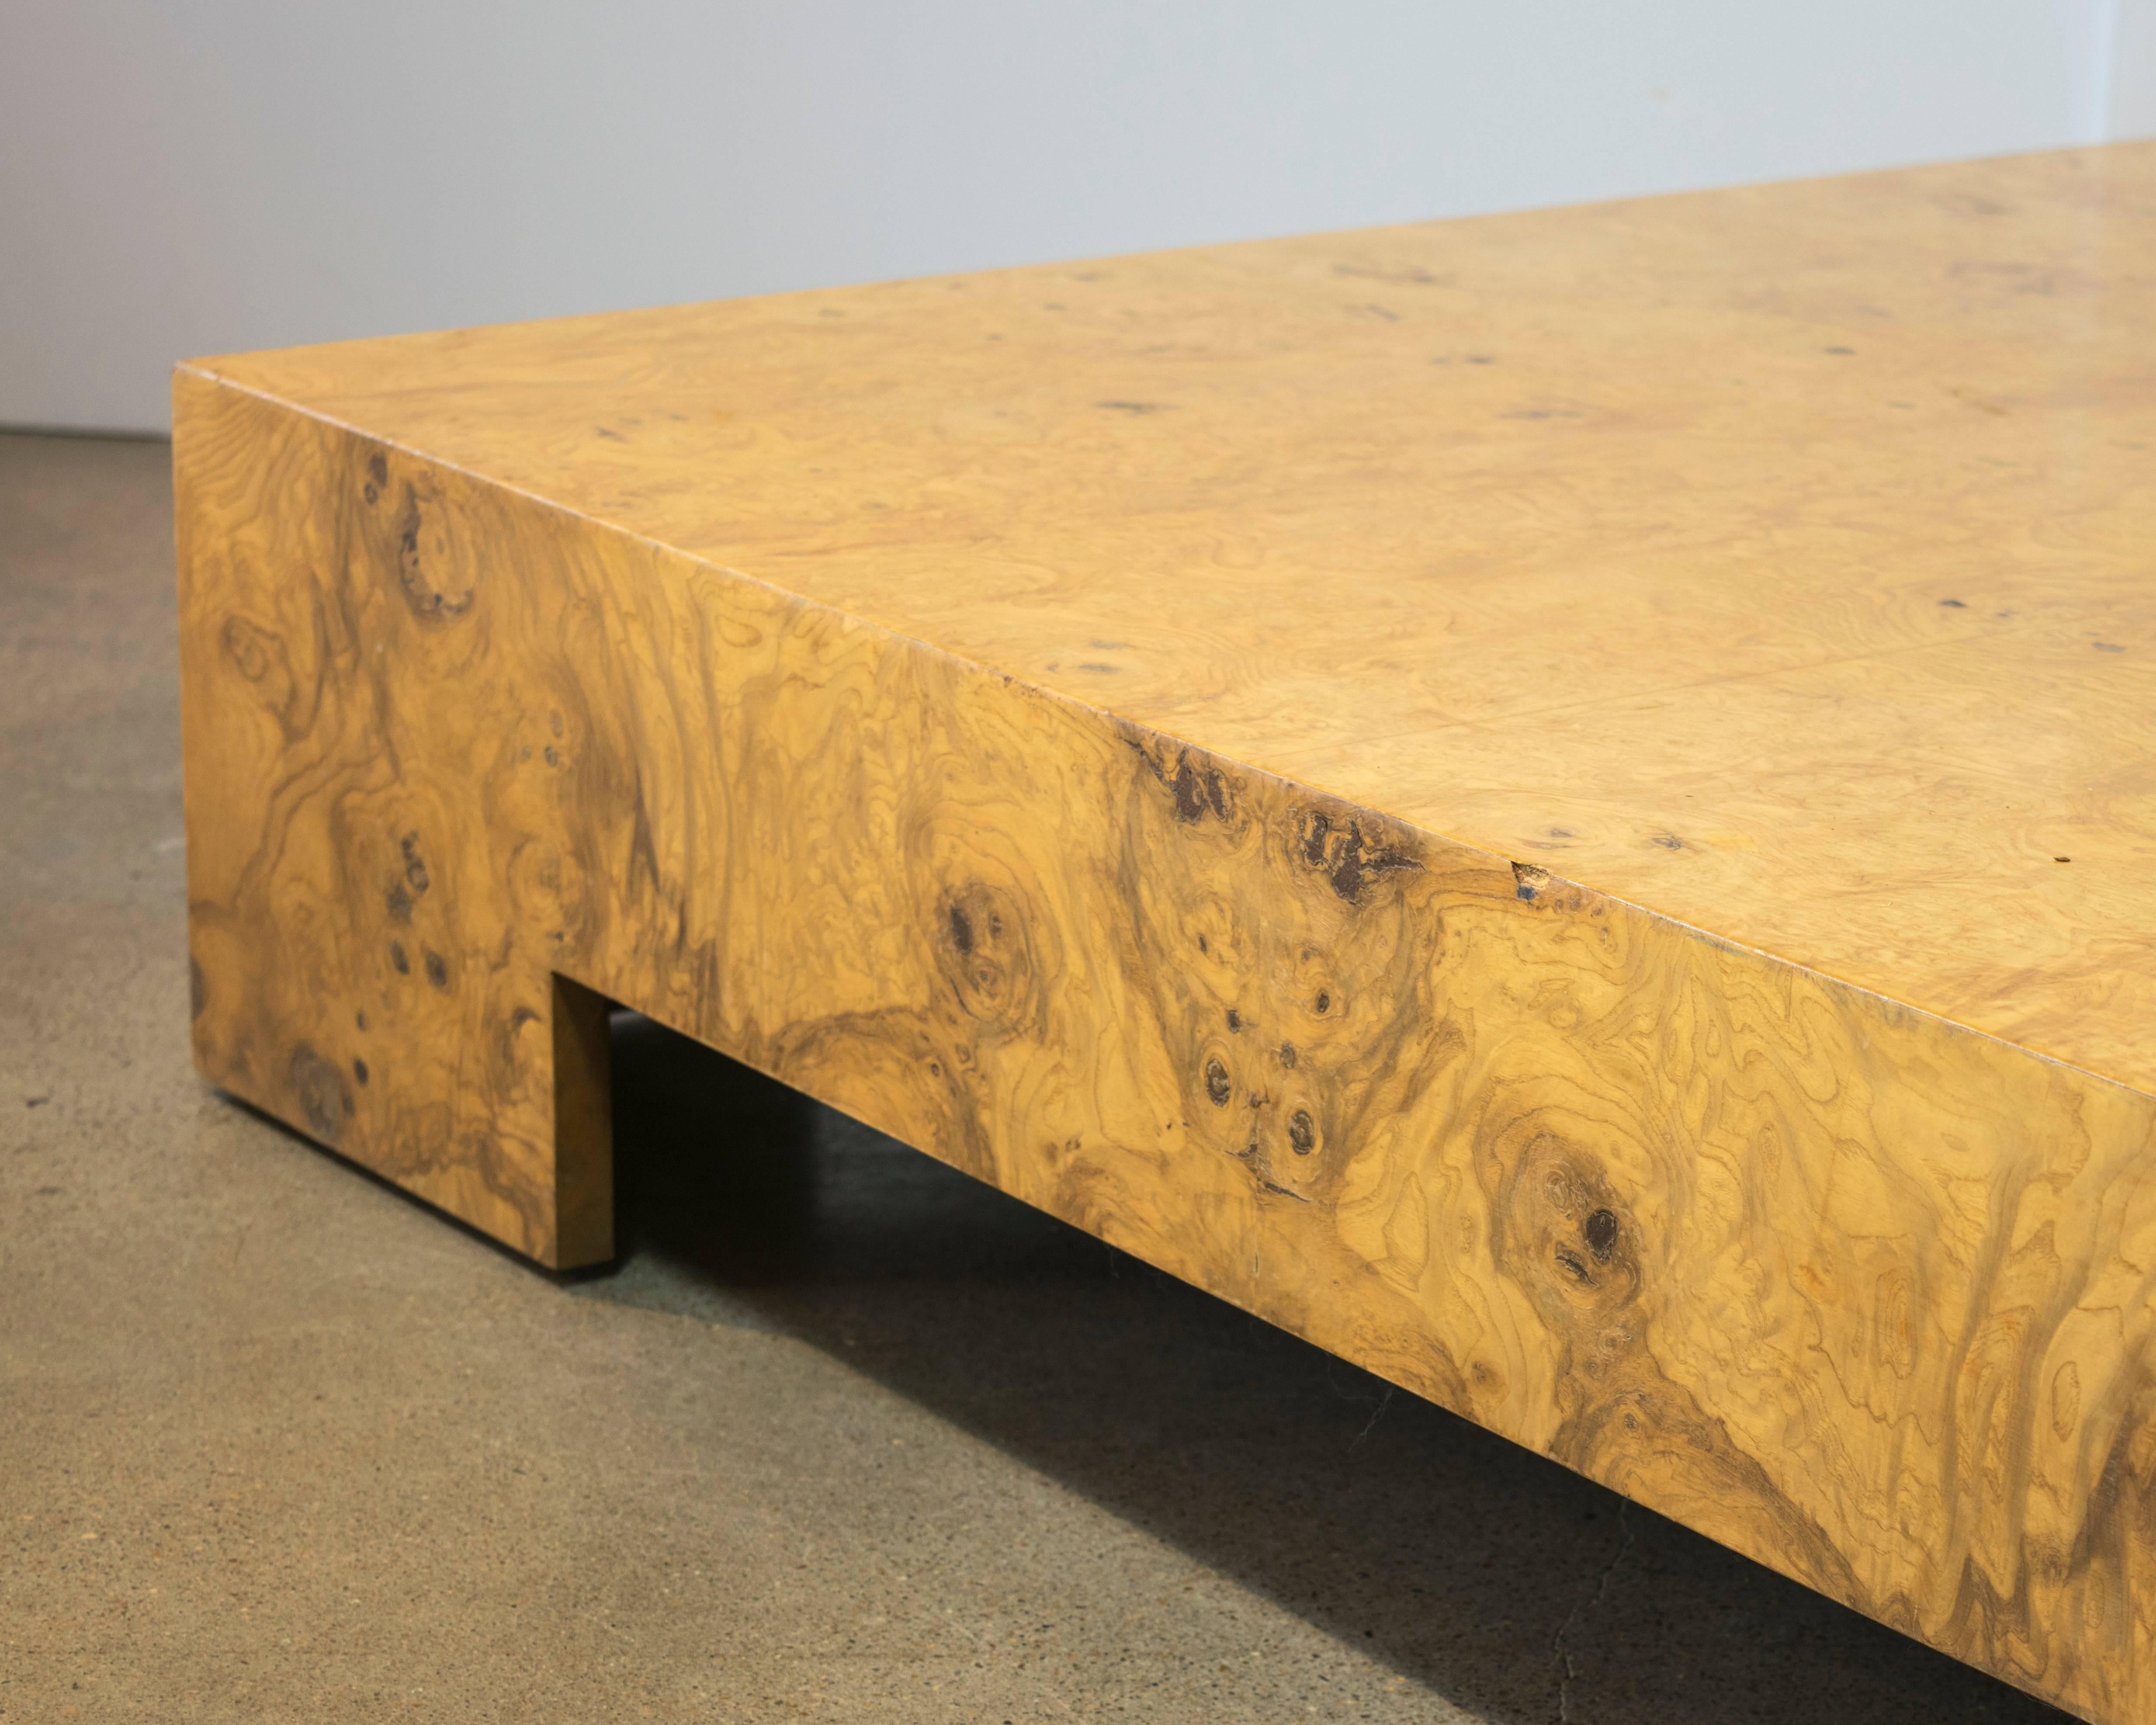 American Square Burl Wood Coffee or Cocktail Table by Milo Baughman